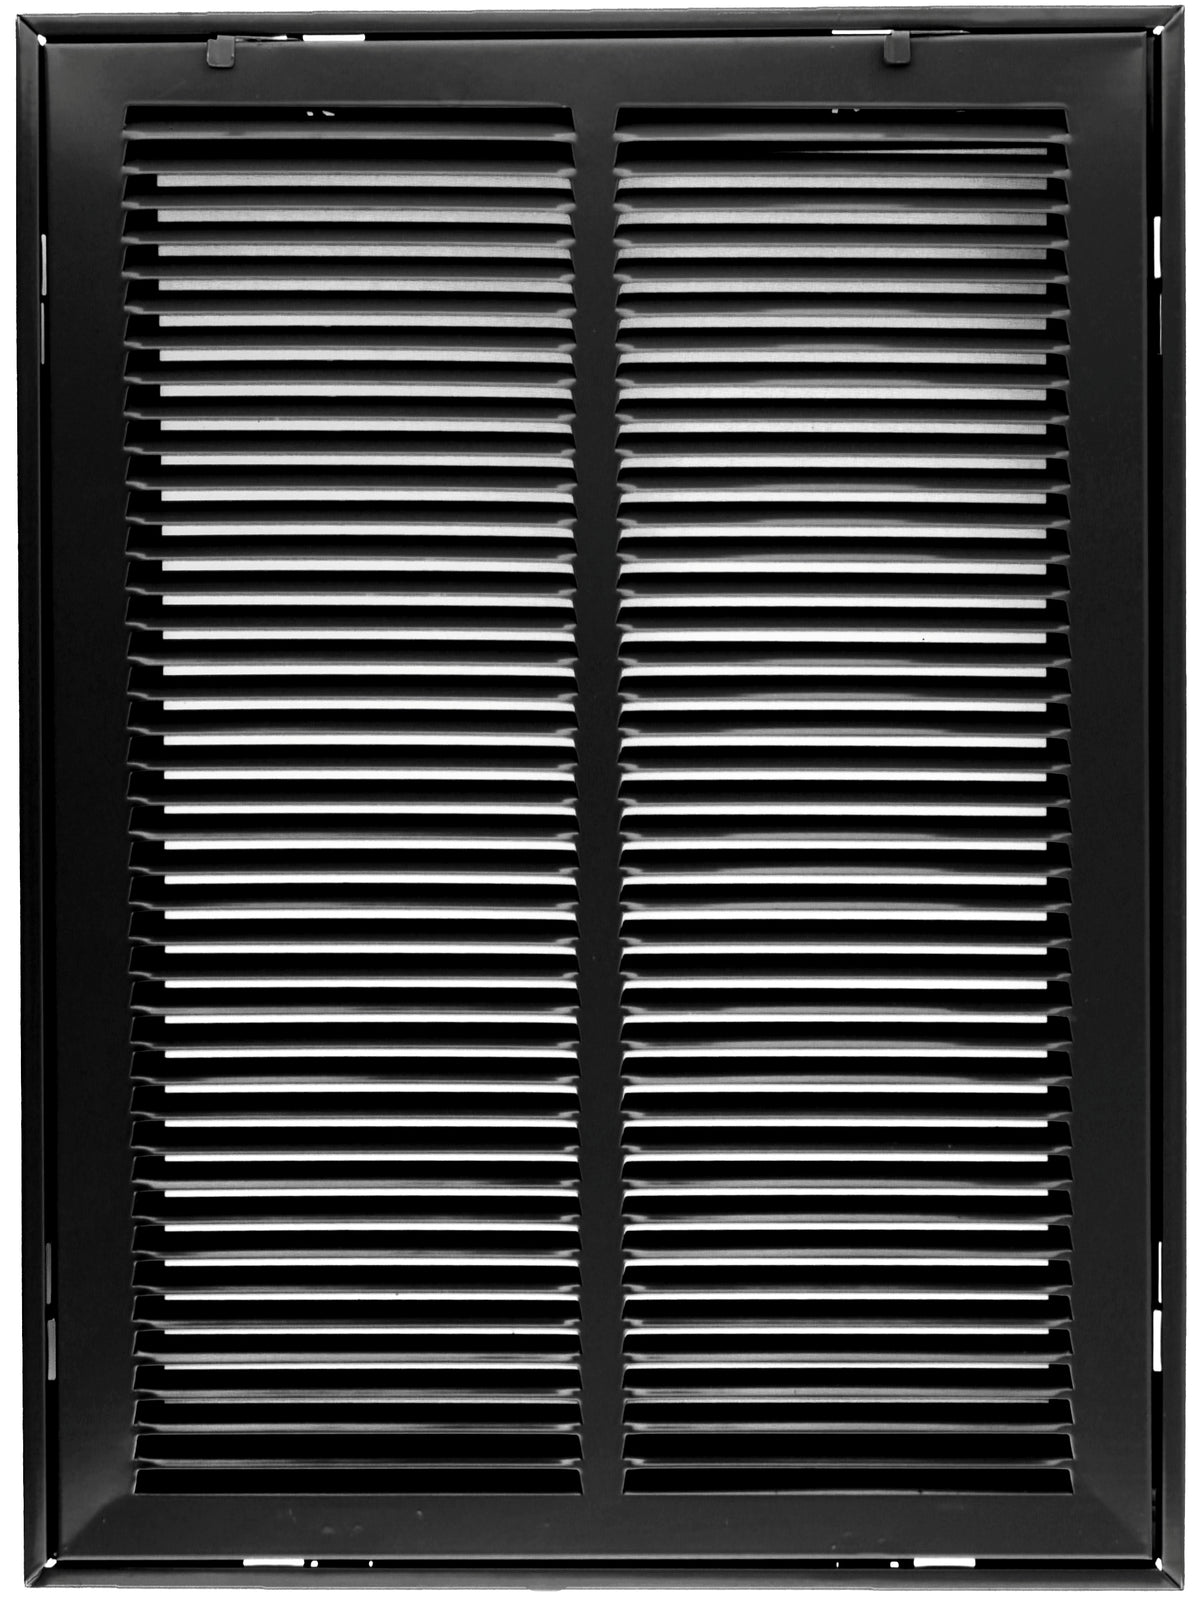 14&quot; X 30&quot; Steel Return Air Filter Grille for 1&quot; Filter - Removable Frame - Black - [Outer Dimensions: 16 5/8&quot; X 32 5/8&quot;]